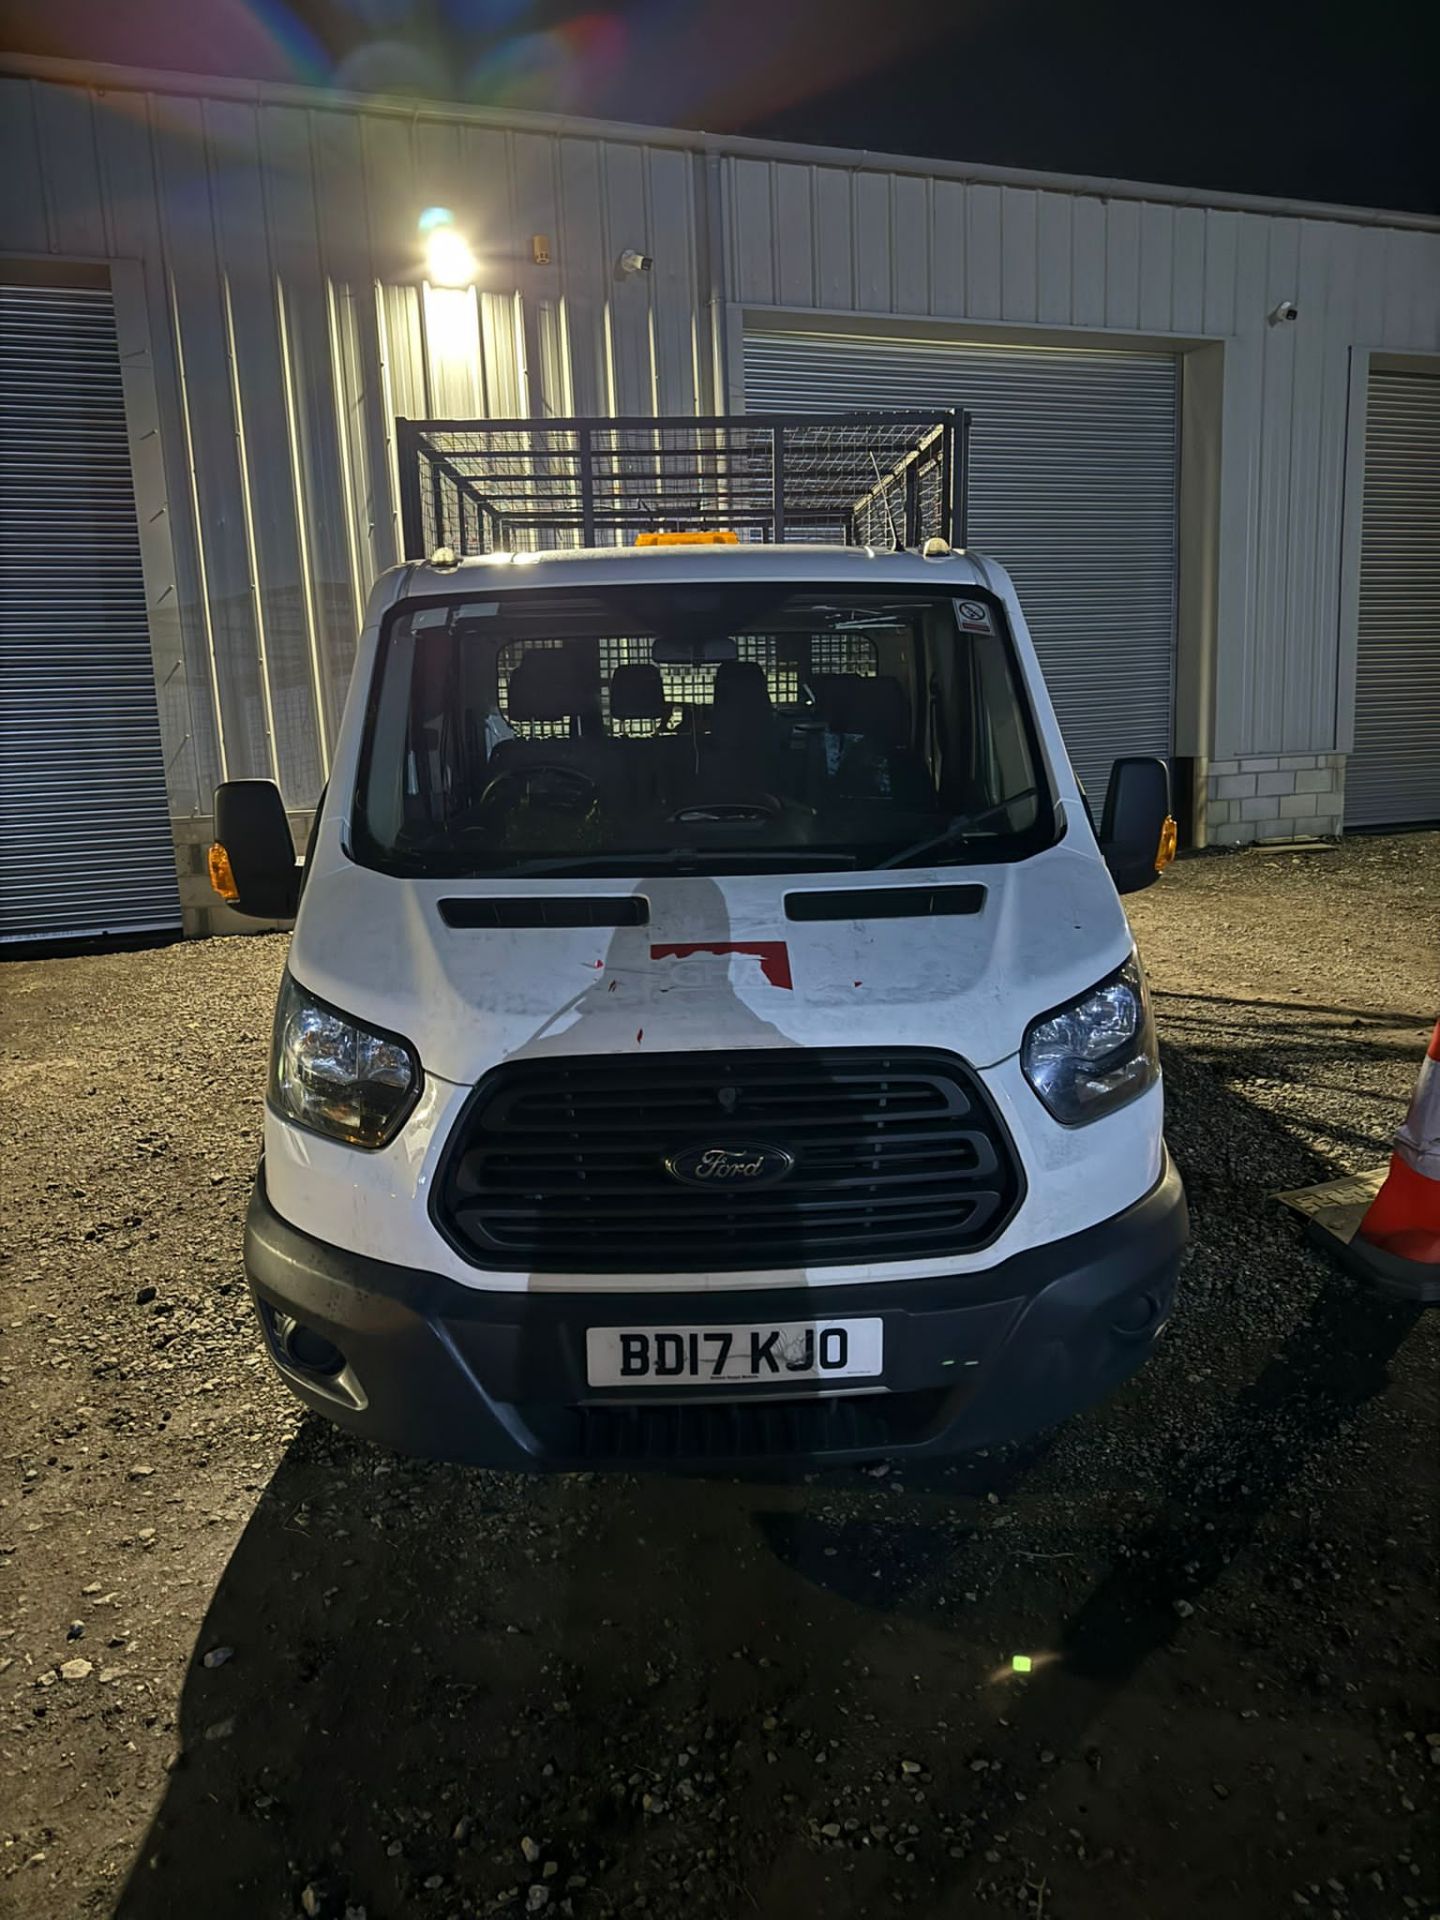 2017 17 FORD TRANSIT CREW CAB CAGED TIPPER - 71K MILES - EURO 6 - 7 SEATS - Image 7 of 8